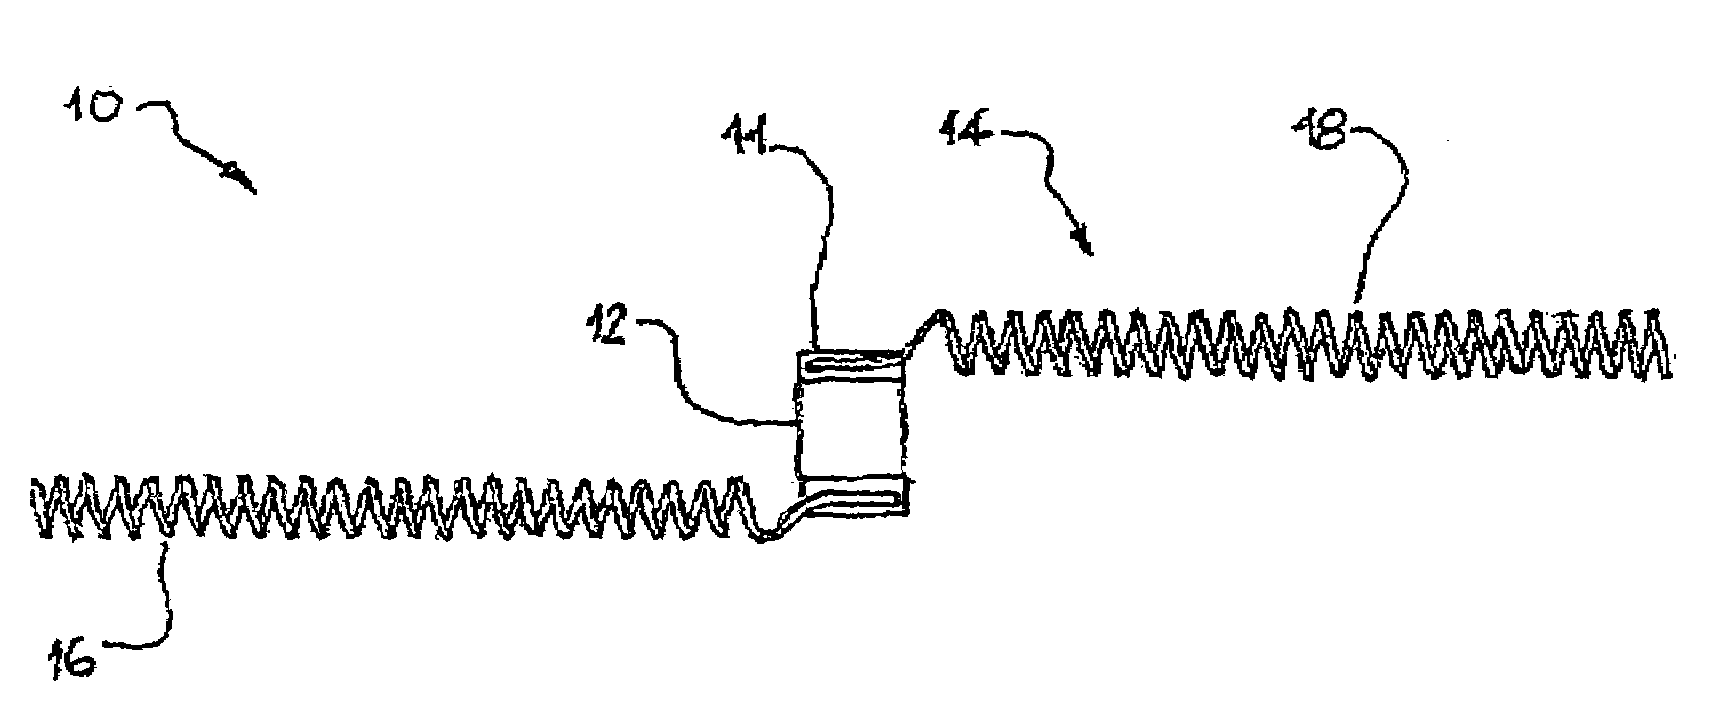 Electronic device for a tire having an extensible antenna